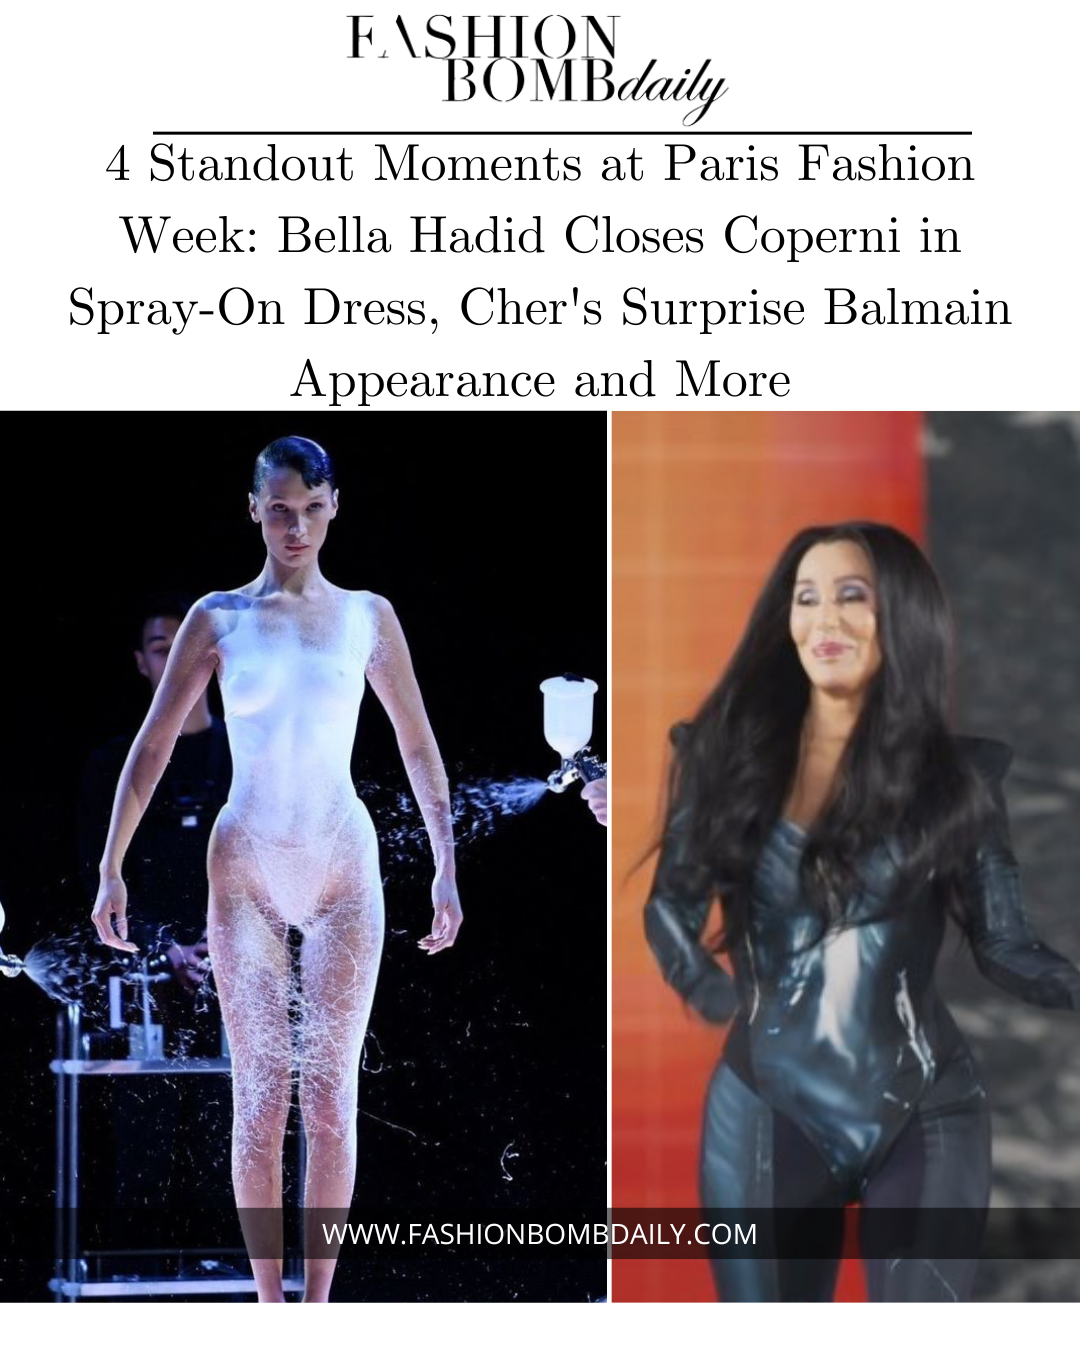 5 Standout Moments at Paris Fashion Week: Bella Hadid Closes Coperni in Spray-On Dress, Cher’s Surprise Balmain Appearance and More